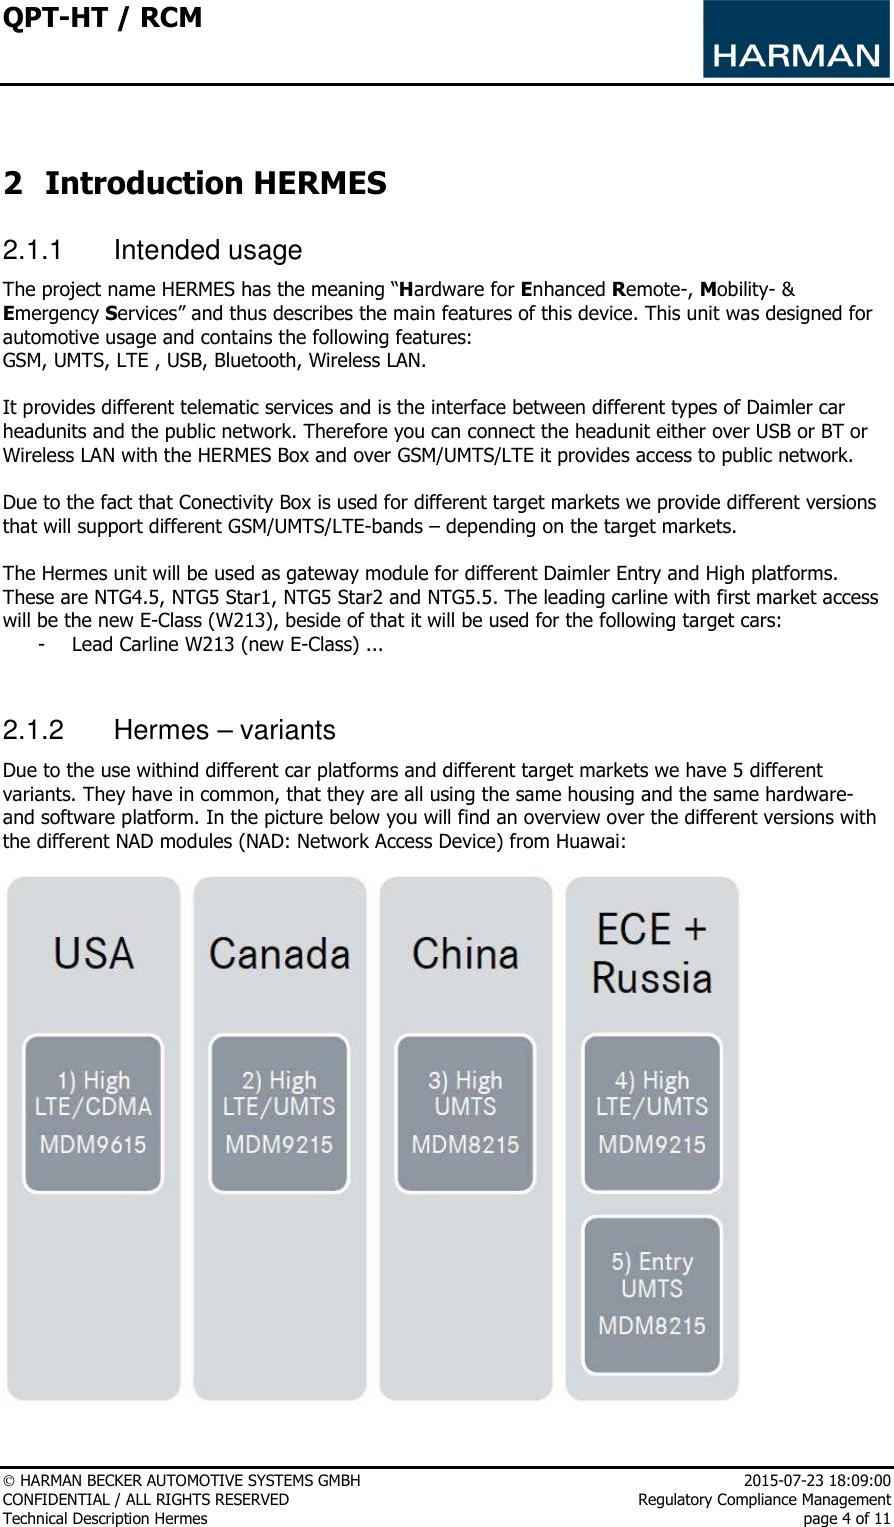 QPT-HT / RCM      HARMAN BECKER AUTOMOTIVE SYSTEMS GMBH    2015-07-23 18:09:00 CONFIDENTIAL / ALL RIGHTS RESERVED     Regulatory Compliance Management Technical Description Hermes    page 4 of 11   2 Introduction HERMES 2.1.1  Intended usage The project name HERMES has the meaning “Hardware for Enhanced Remote-, Mobility- &amp; Emergency Services” and thus describes the main features of this device. This unit was designed for automotive usage and contains the following features:  GSM, UMTS, LTE , USB, Bluetooth, Wireless LAN.   It provides different telematic services and is the interface between different types of Daimler car headunits and the public network. Therefore you can connect the headunit either over USB or BT or Wireless LAN with the HERMES Box and over GSM/UMTS/LTE it provides access to public network.  Due to the fact that Conectivity Box is used for different target markets we provide different versions that will support different GSM/UMTS/LTE-bands – depending on the target markets.  The Hermes unit will be used as gateway module for different Daimler Entry and High platforms. These are NTG4.5, NTG5 Star1, NTG5 Star2 and NTG5.5. The leading carline with first market access will be the new E-Class (W213), beside of that it will be used for the following target cars:  - Lead Carline W213 (new E-Class) ...   2.1.2  Hermes – variants Due to the use withind different car platforms and different target markets we have 5 different variants. They have in common, that they are all using the same housing and the same hardware- and software platform. In the picture below you will find an overview over the different versions with the different NAD modules (NAD: Network Access Device) from Huawai:   